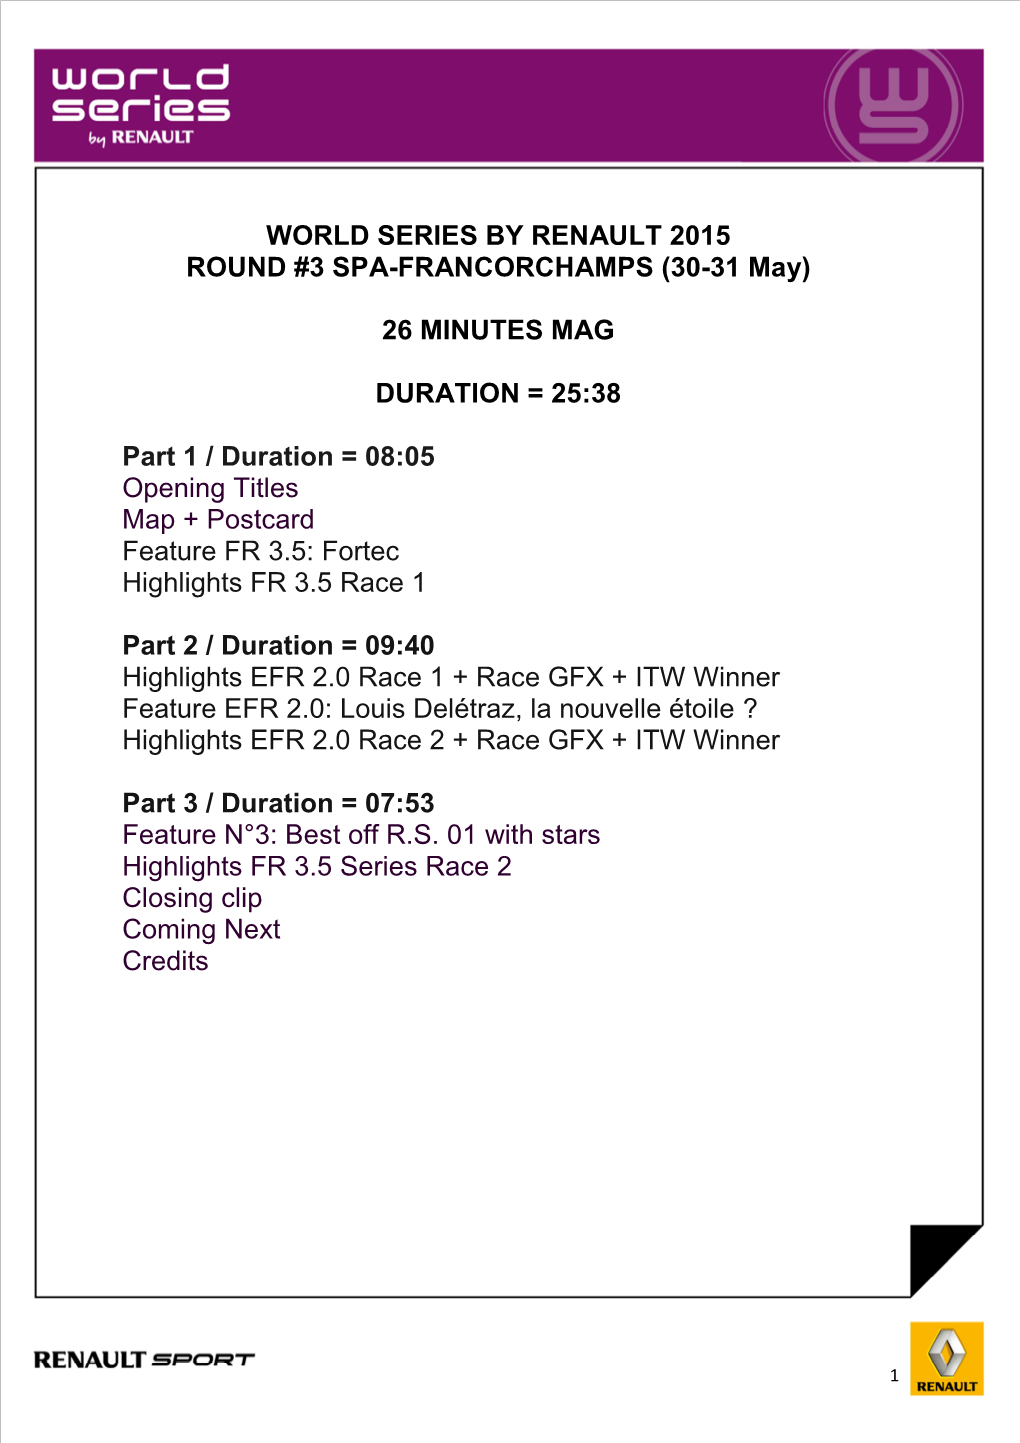 WORLD SERIES by RENAULT 2015 ROUND #3 SPA-FRANCORCHAMPS (30-31 May)